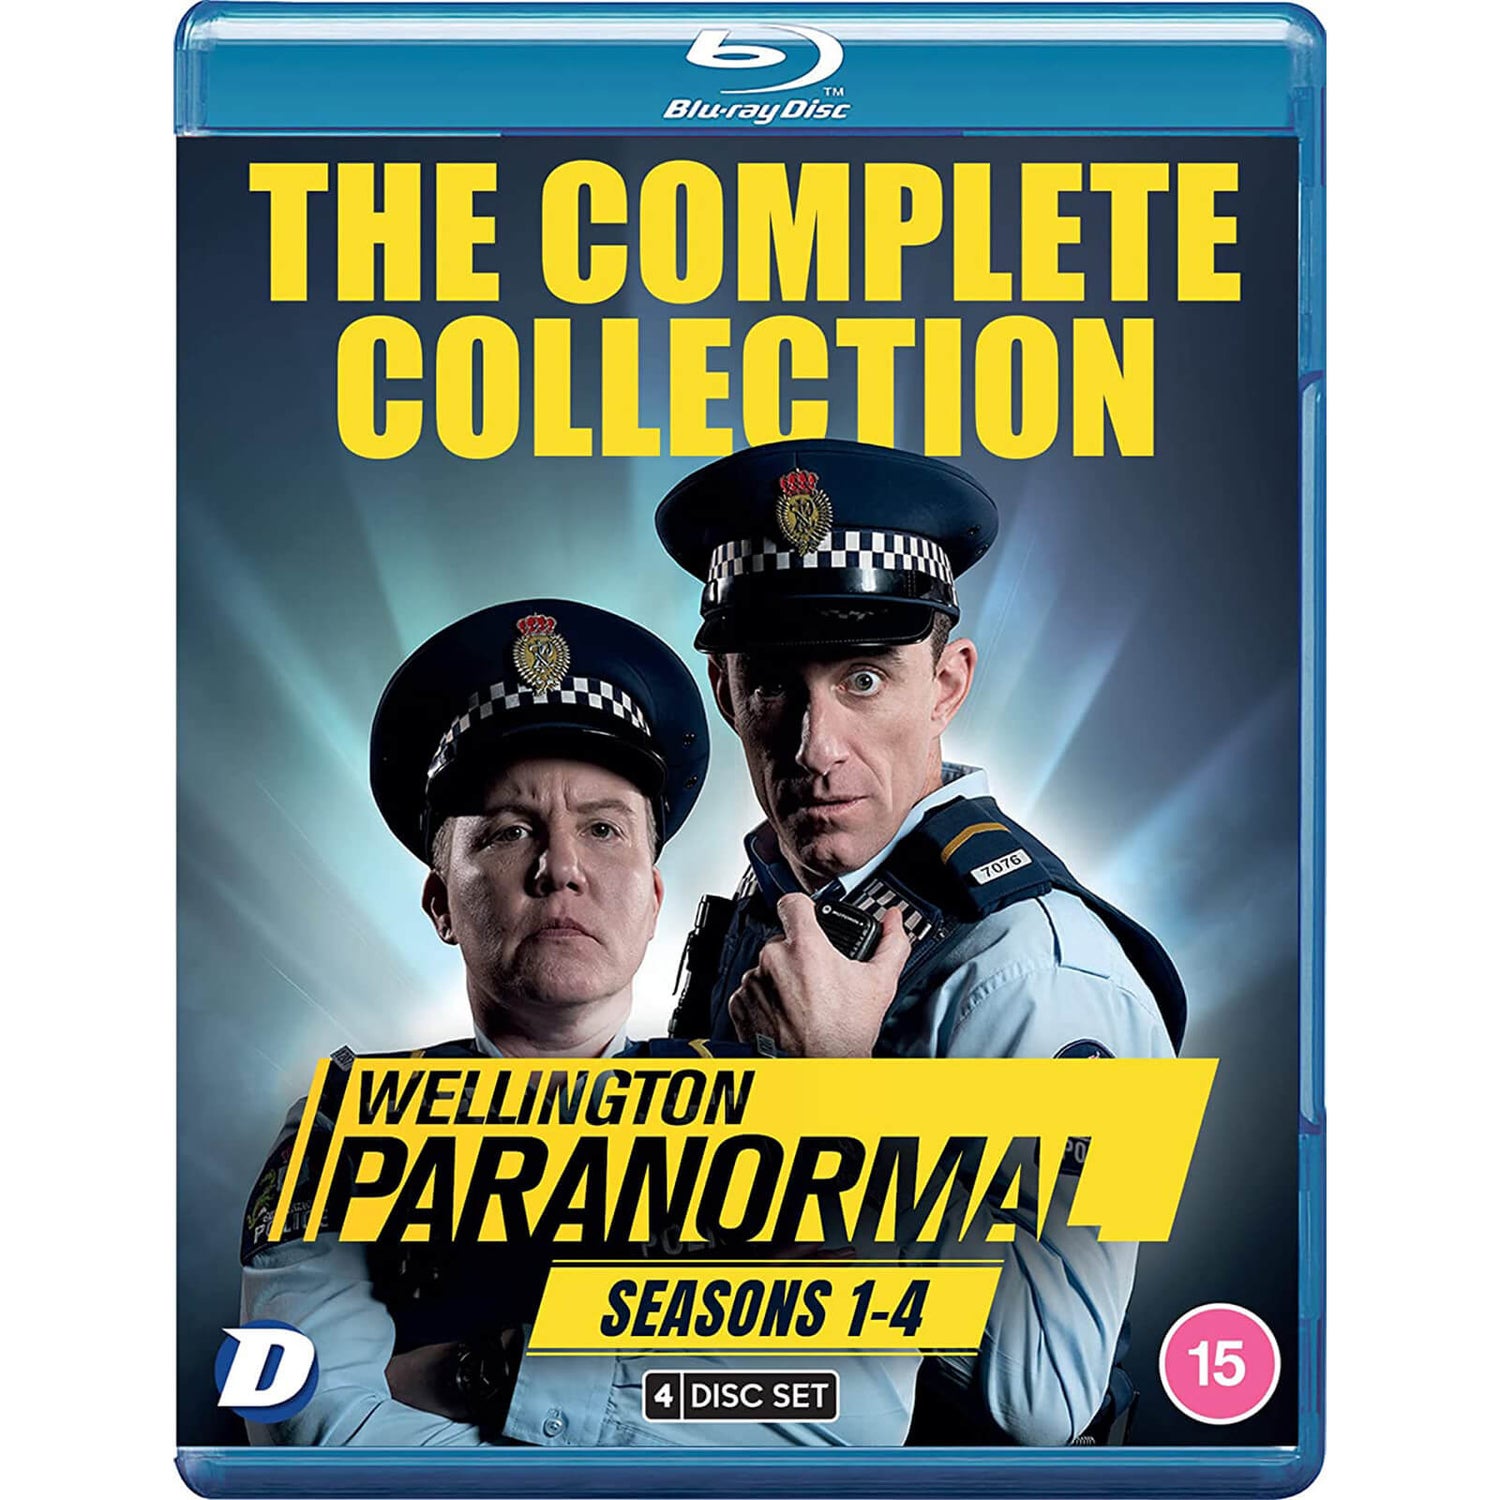 Wellington Paranormal - The Complete Collection: Season 1-4